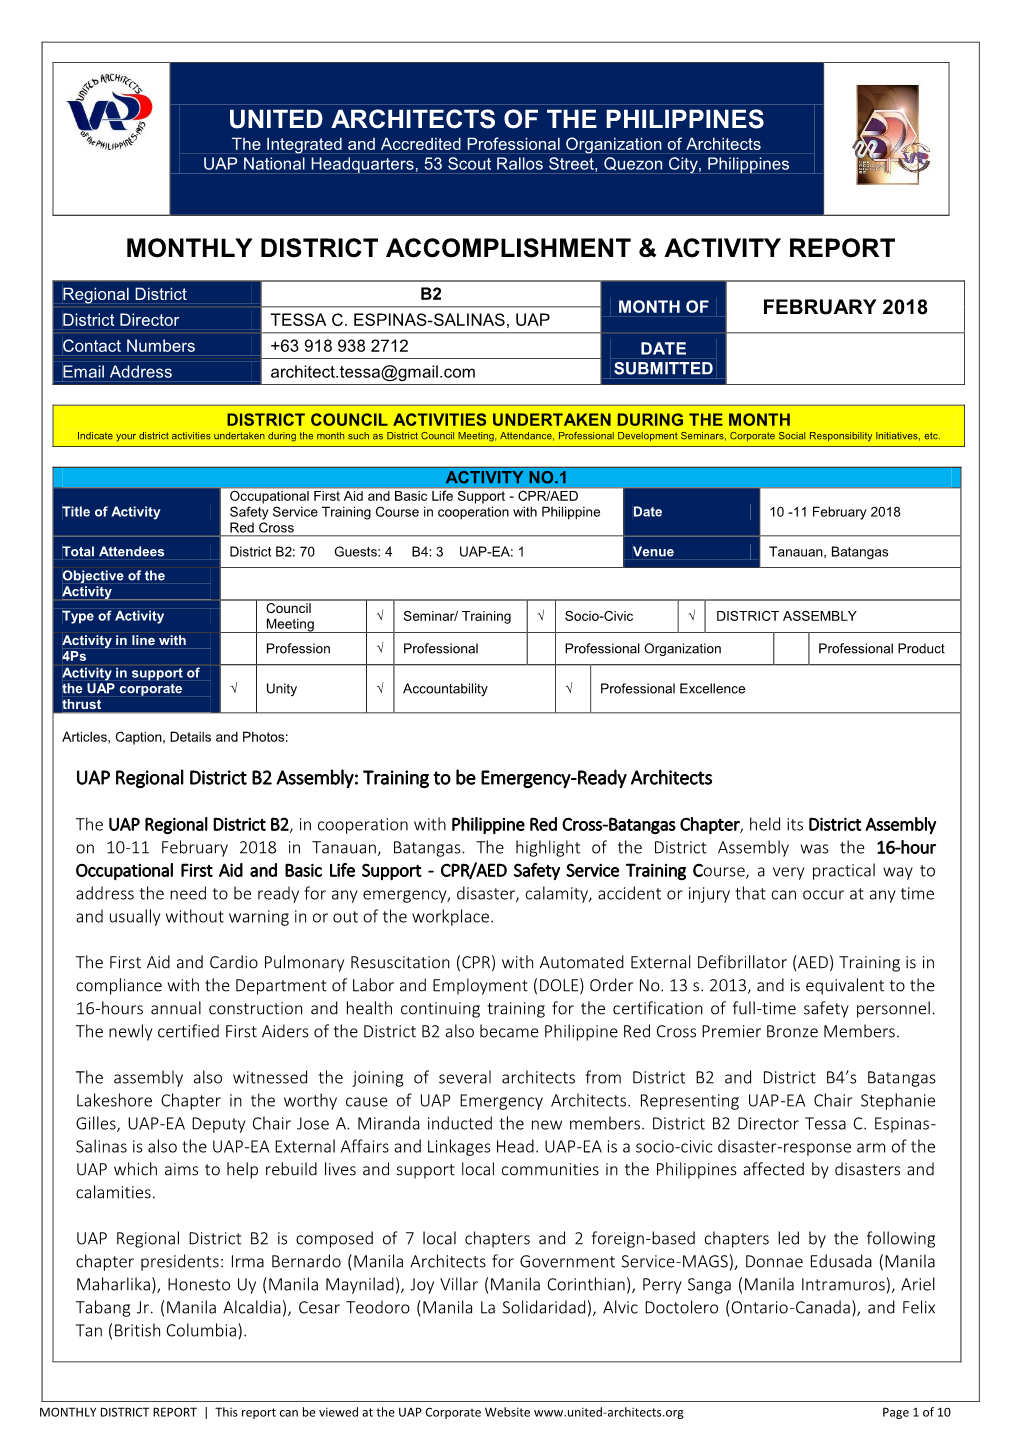 Monthly District Accomplishment & Activity Report